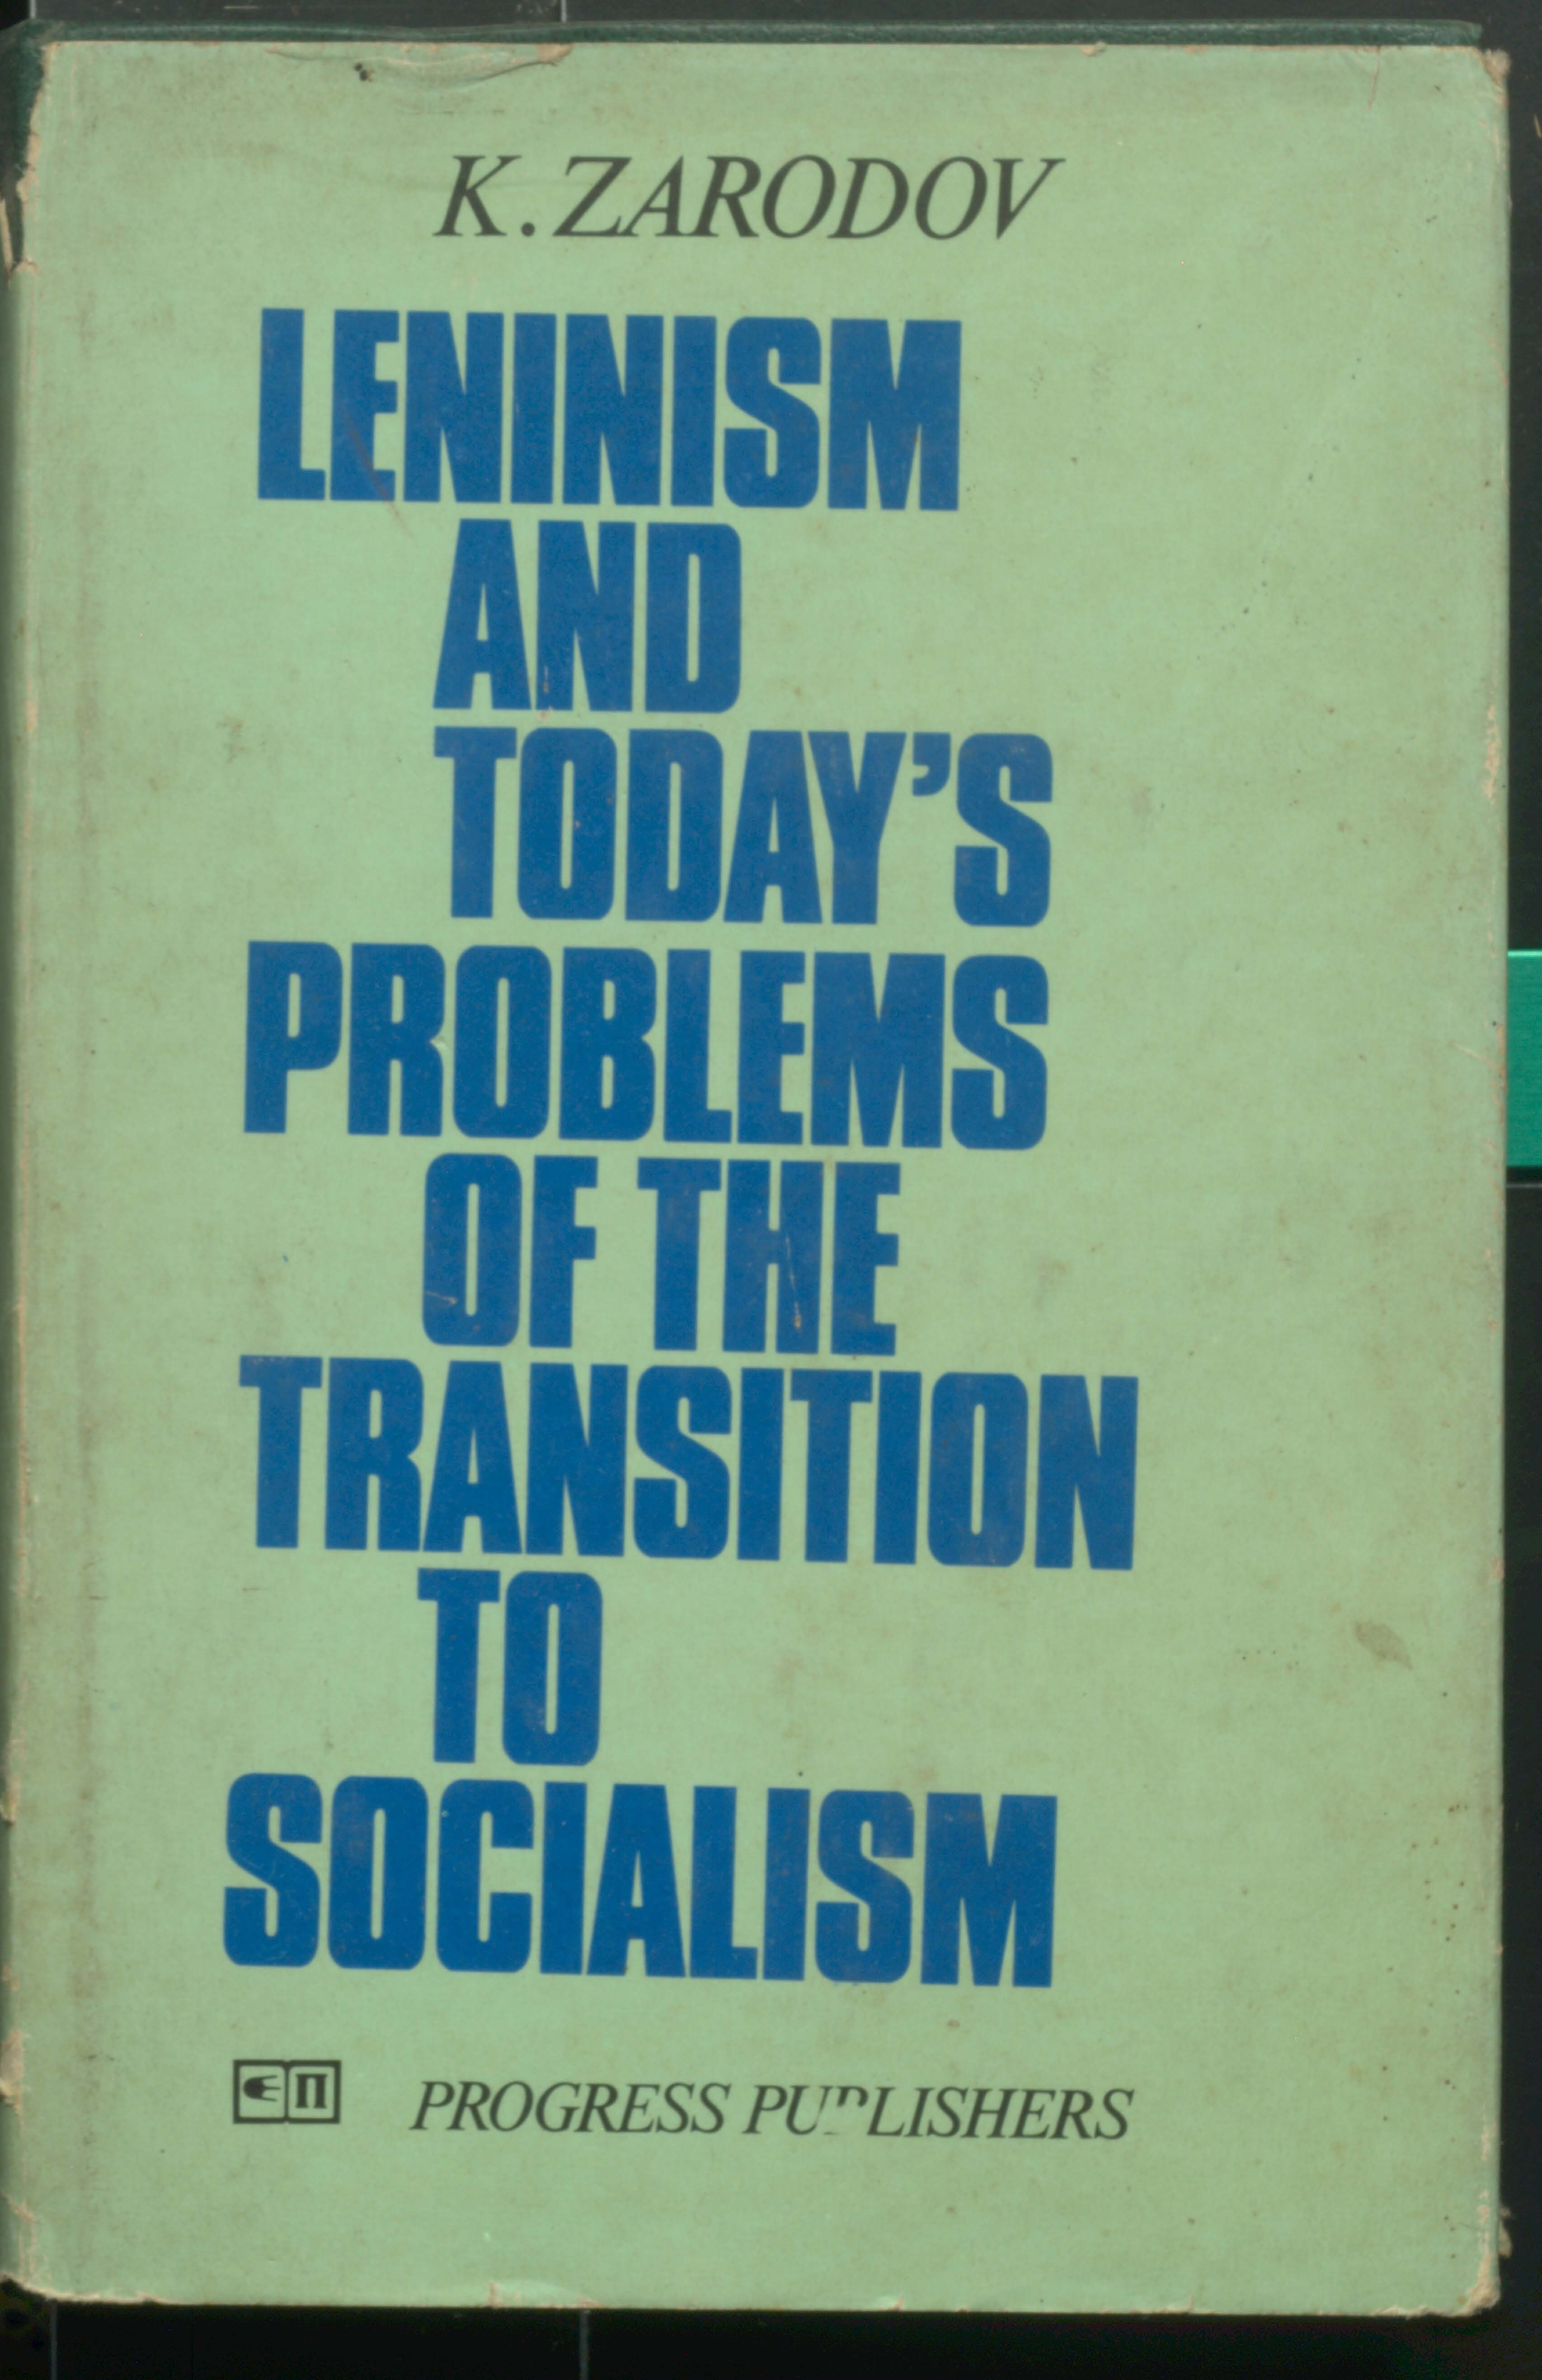 Leninism and Today's Problems of the Transition to Socialism